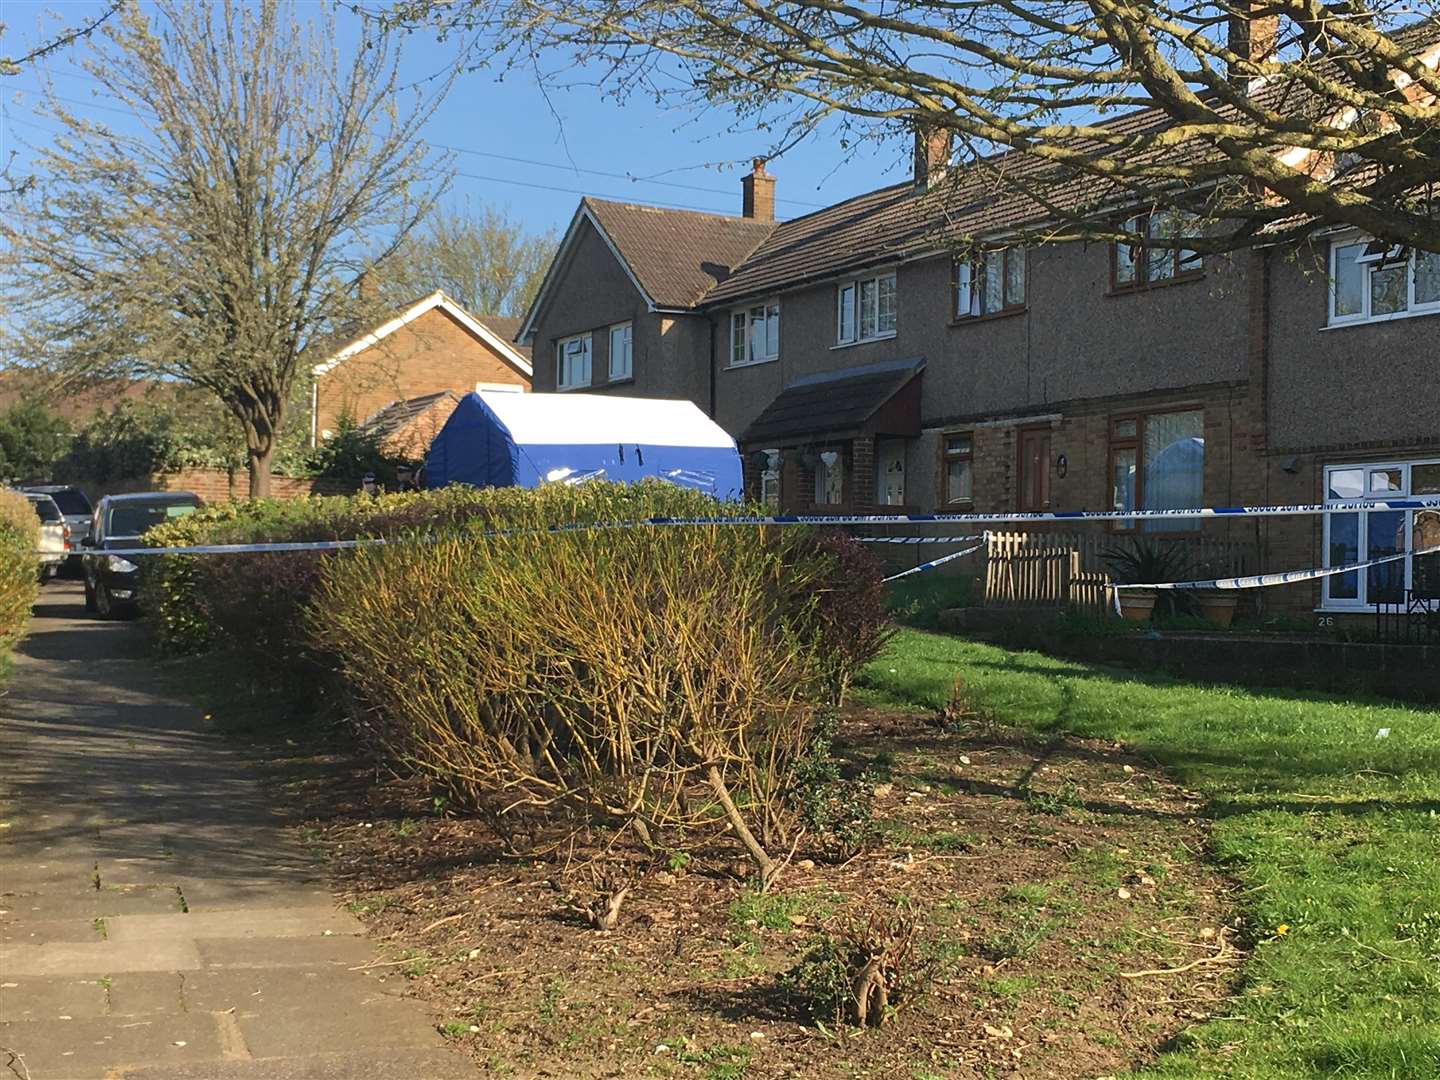 Lewis Ludlow had his home in Warren Wood Road searched by police in April